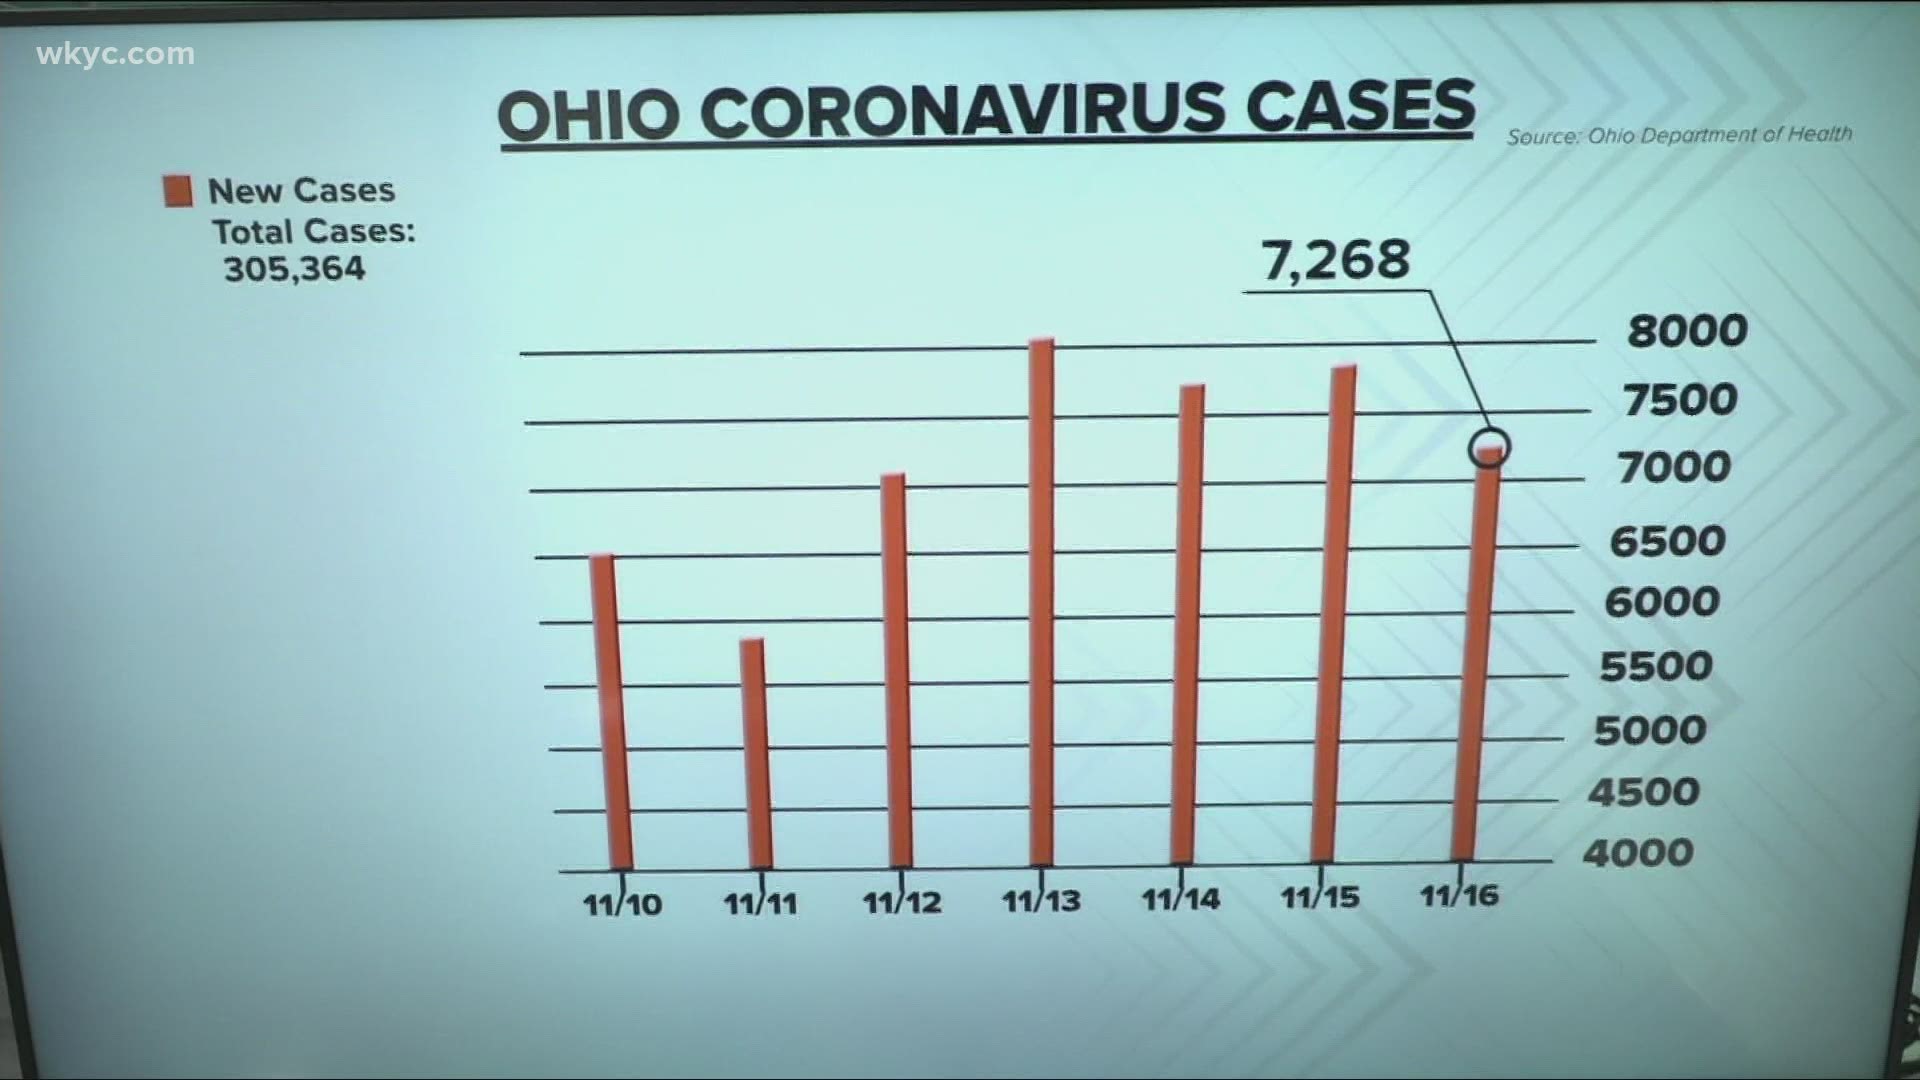 It's another big day for COVID-19 cases here in Ohio.  There were 7,268 new cases reported within the last 24-hours.